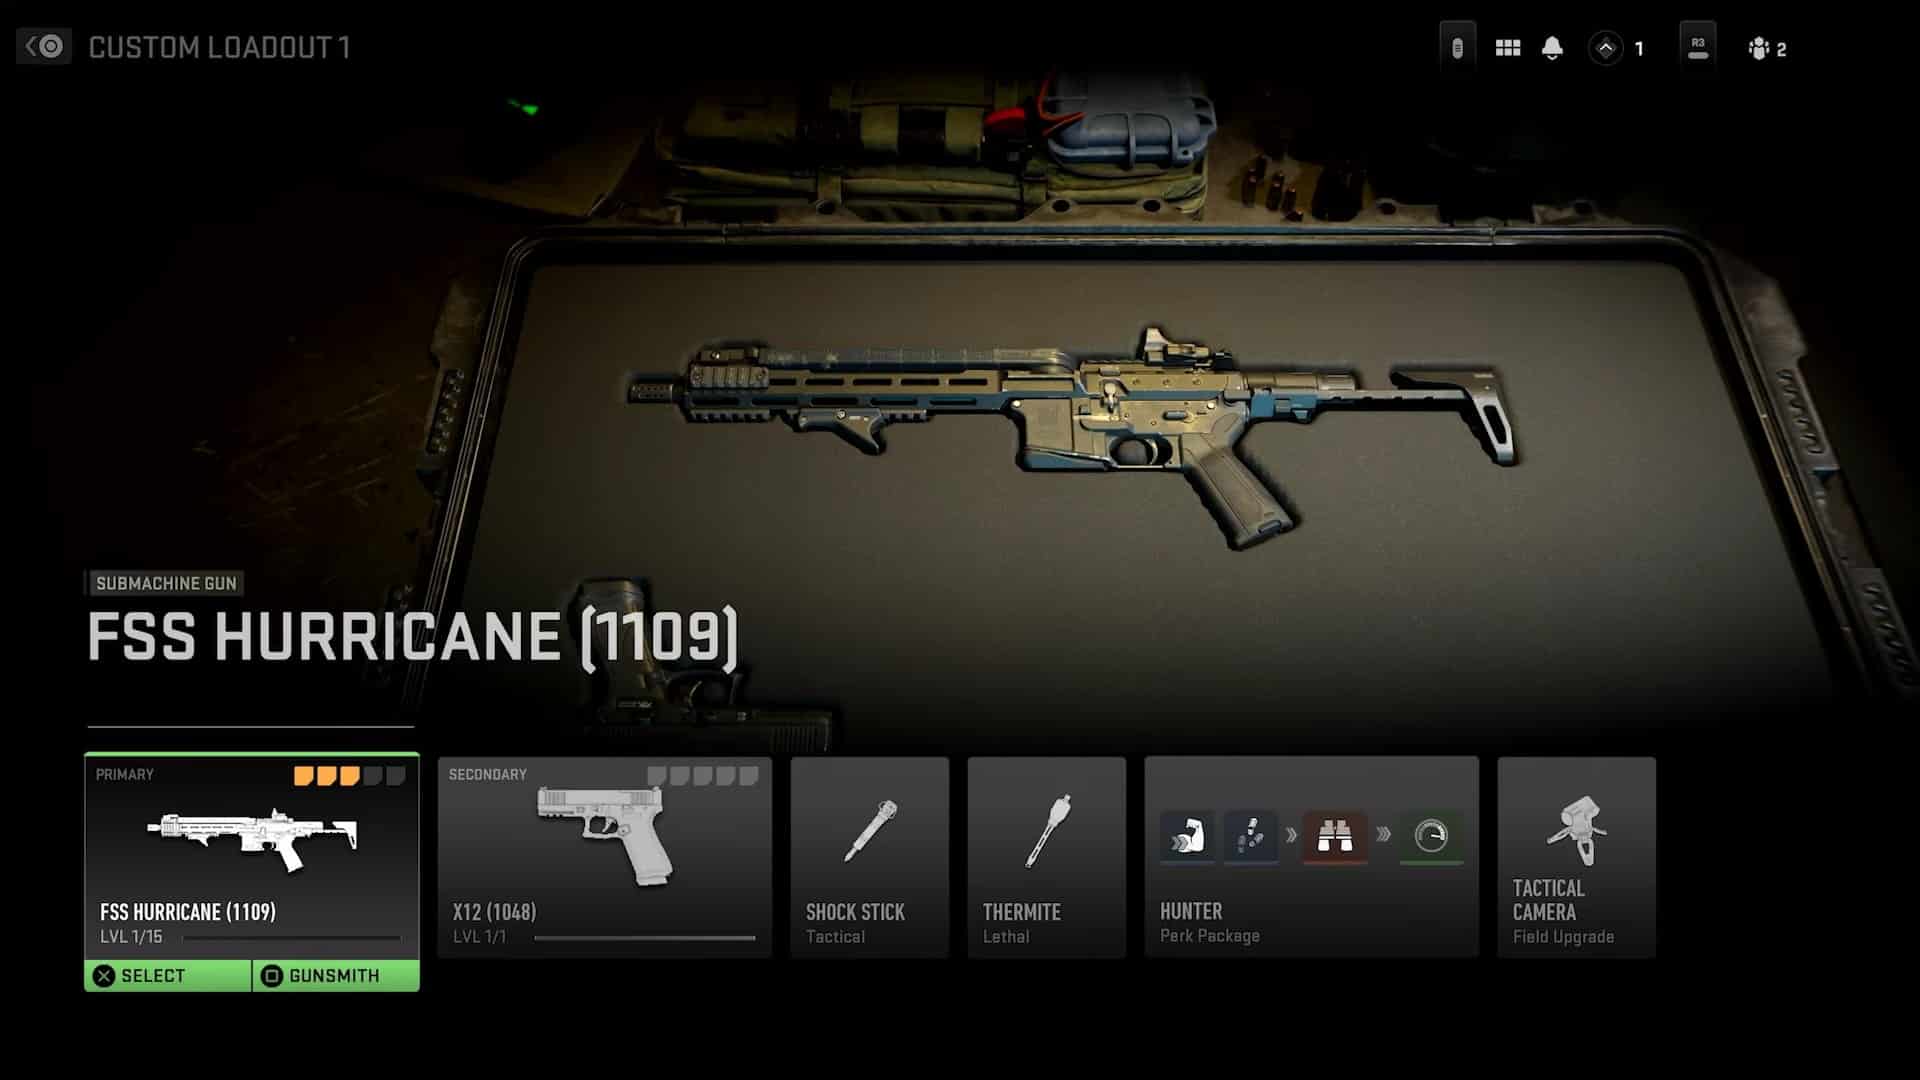 (Gunsmith 2.0 revealed: This is what the new menu looks like. Note the 4 perks and the 5 slots for attachments per weapon.)